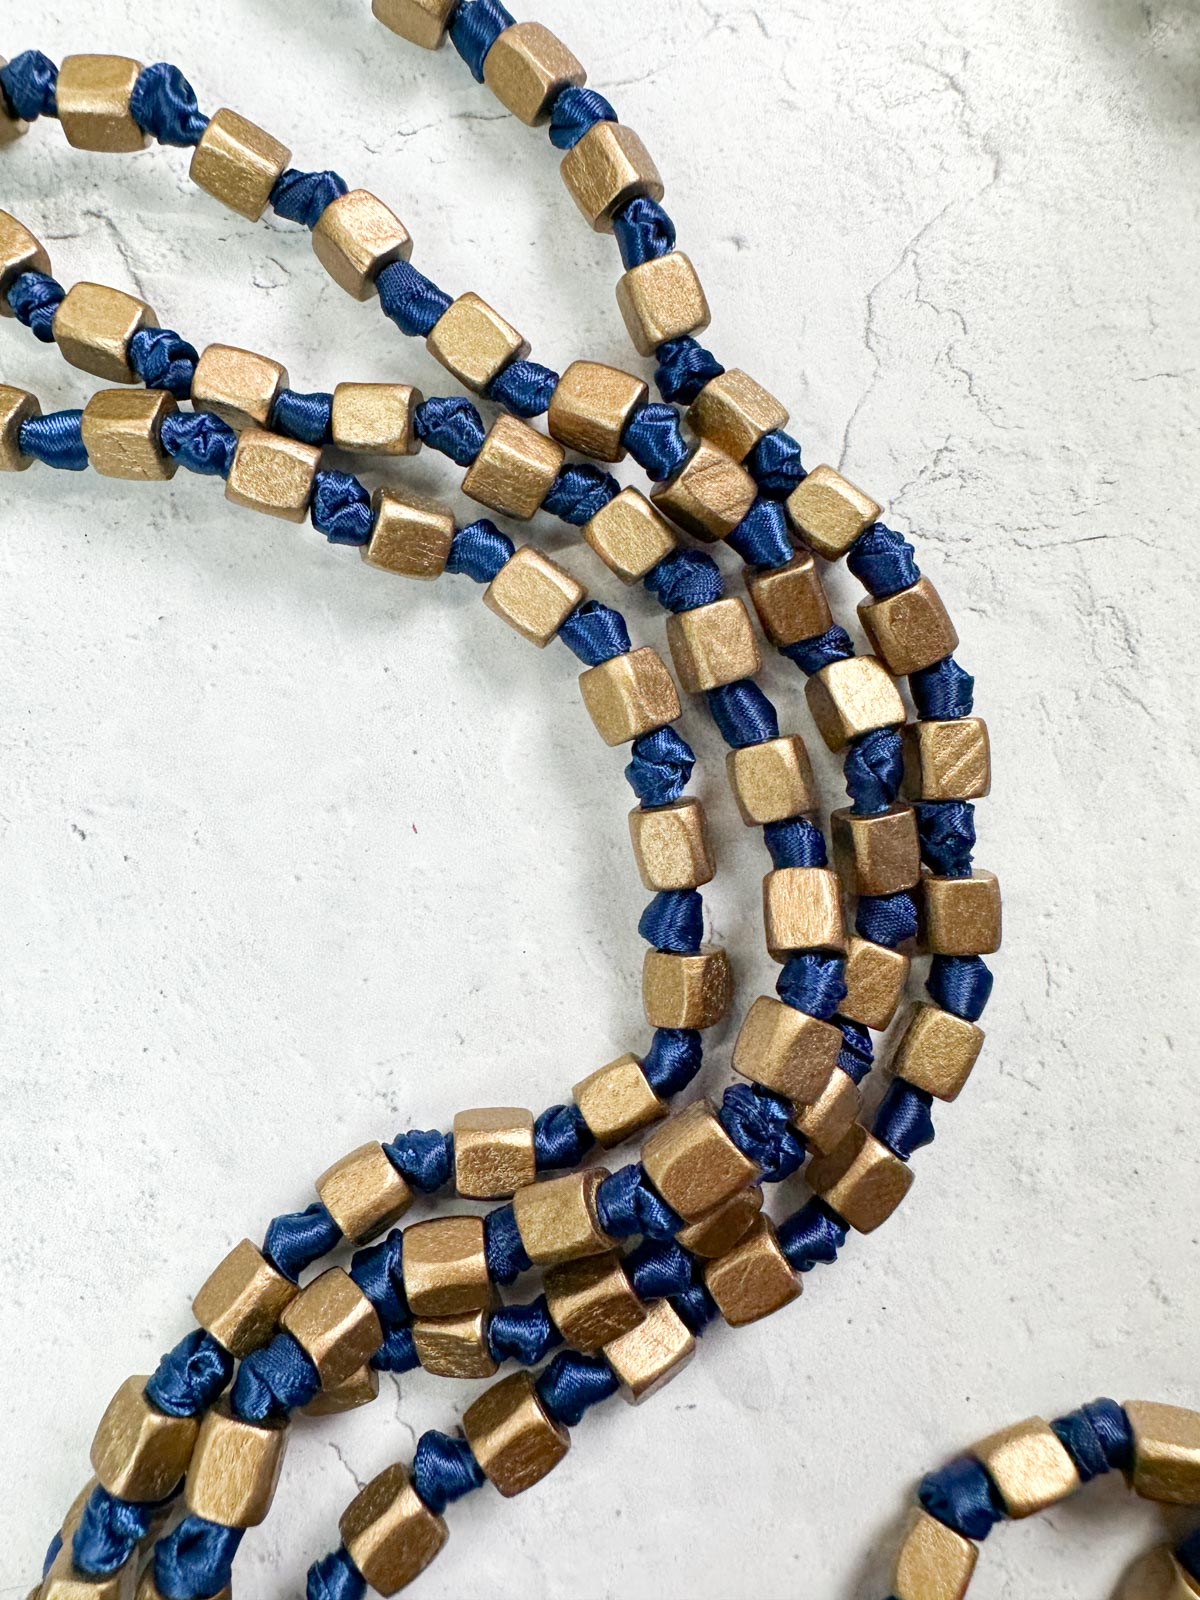 Jianhui London 4 Strand Square Bead on Knotted Cord Necklace, Gold/Royal Blue - Statement Boutique